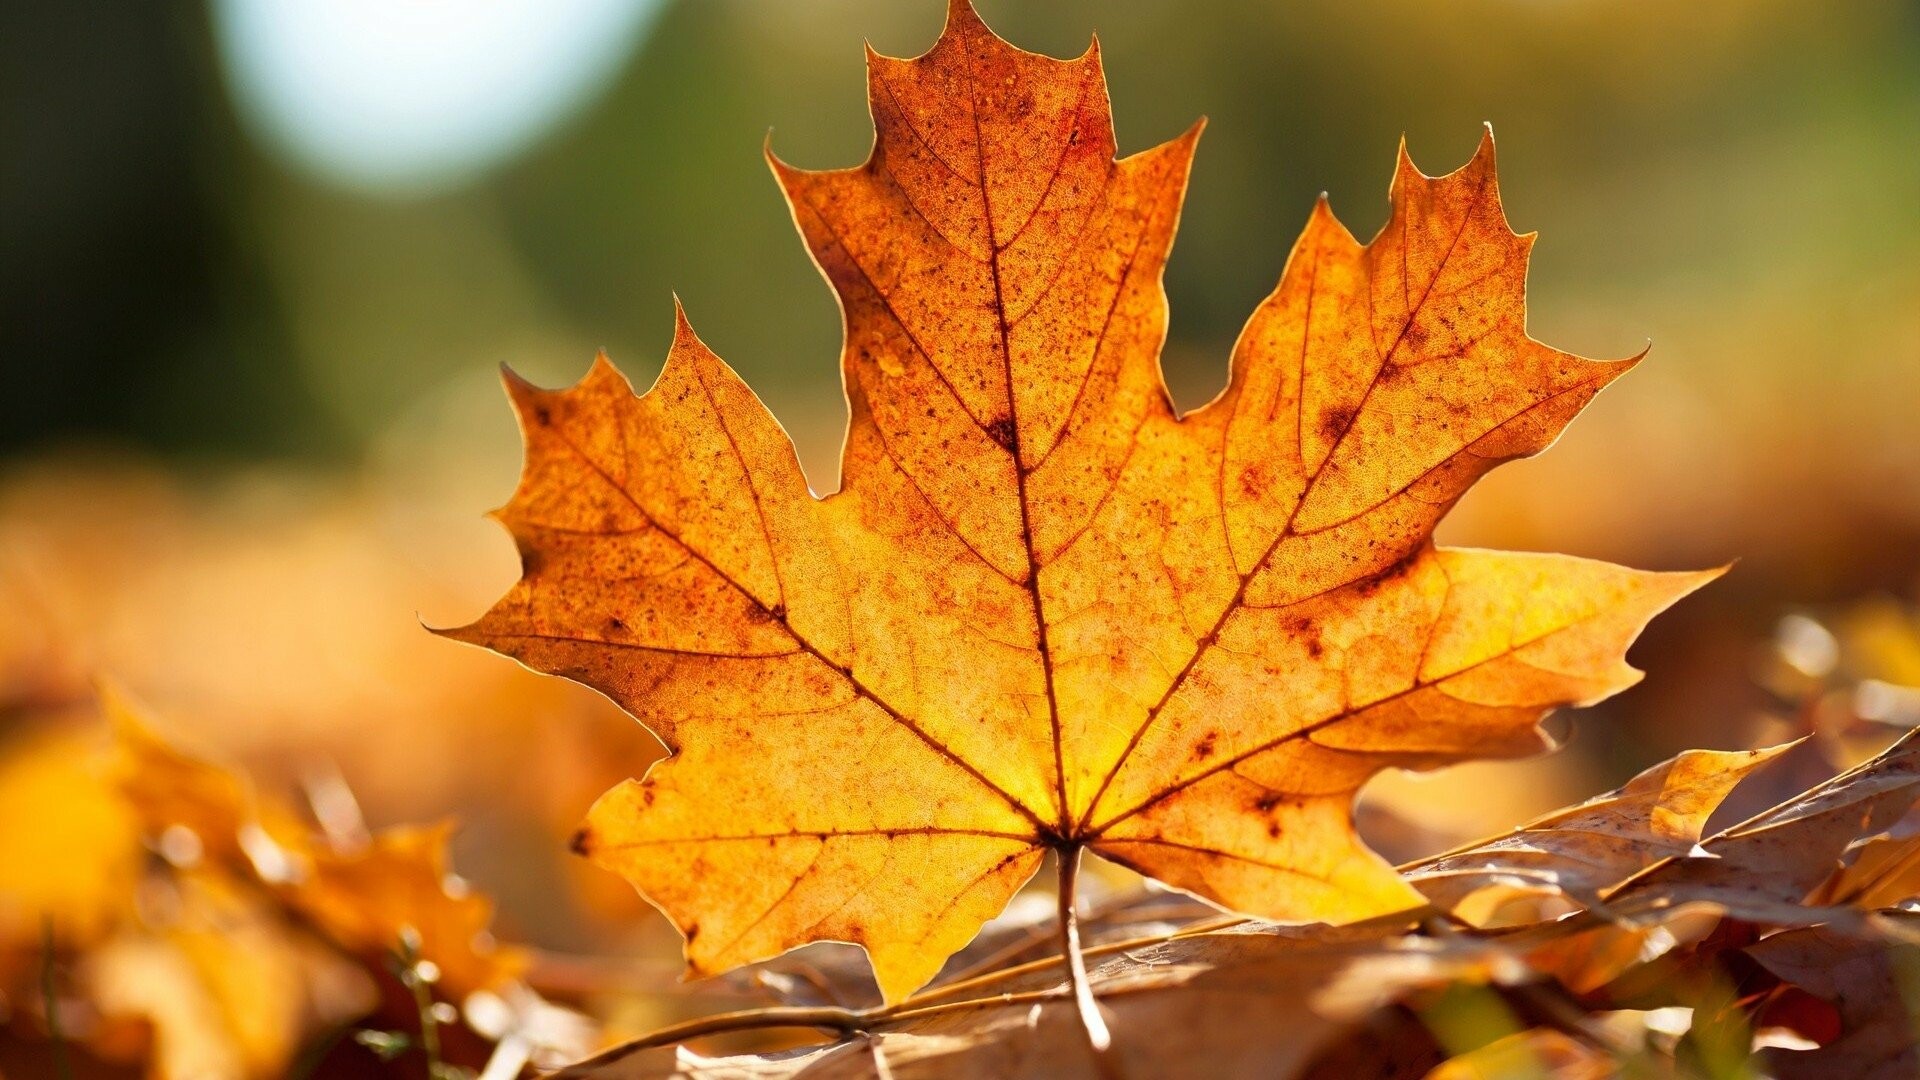 Leaf: Maple, Responsible for physiological functions in the plant, such as respiration and evaporation. 1920x1080 Full HD Background.